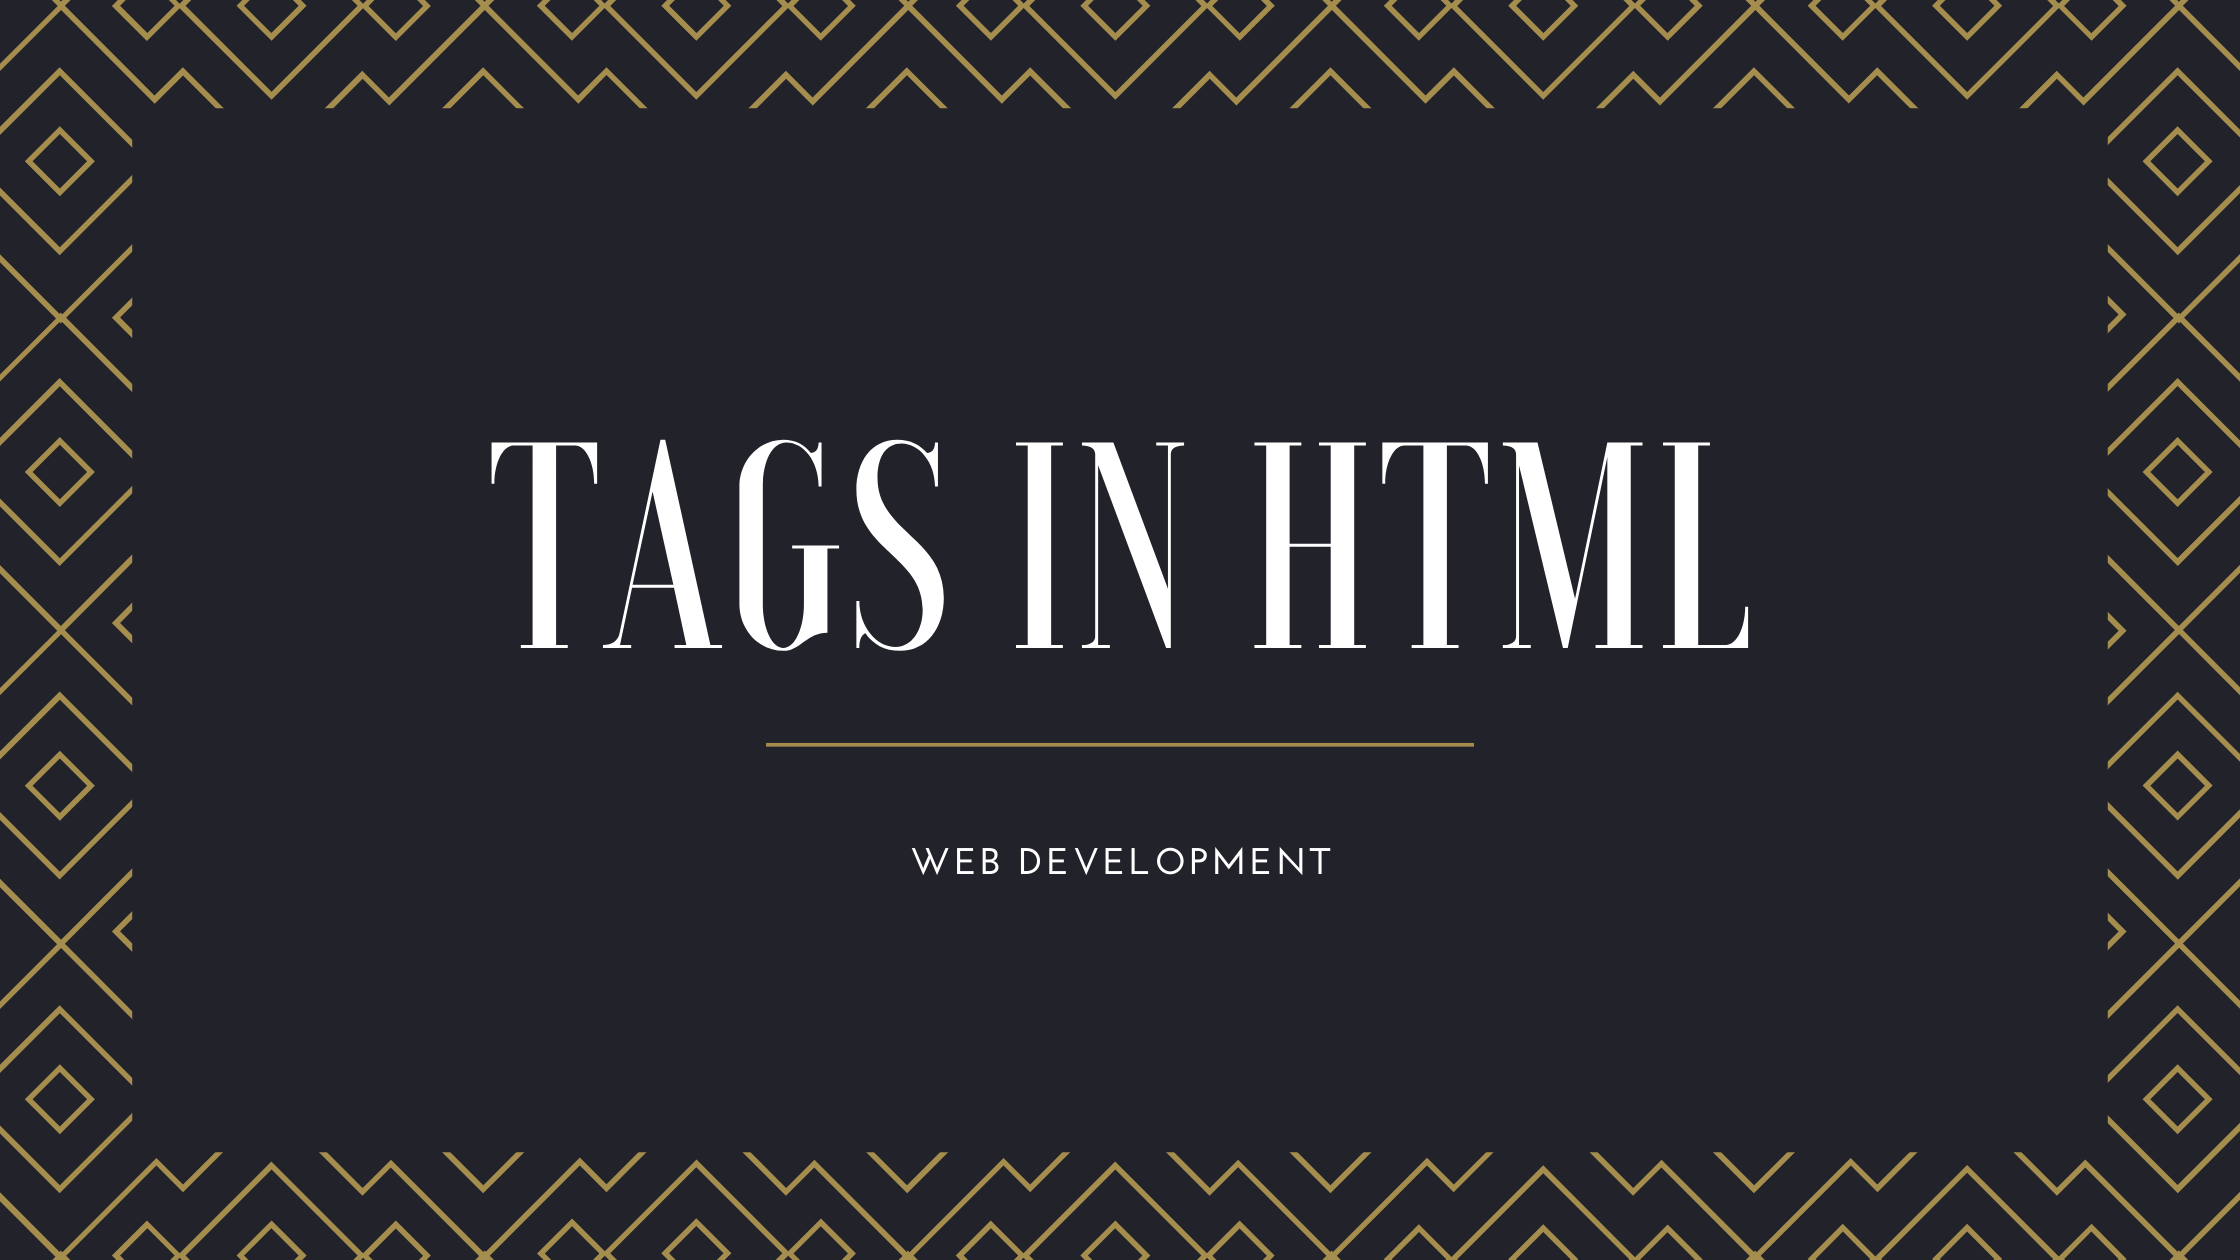 Tags in HTML